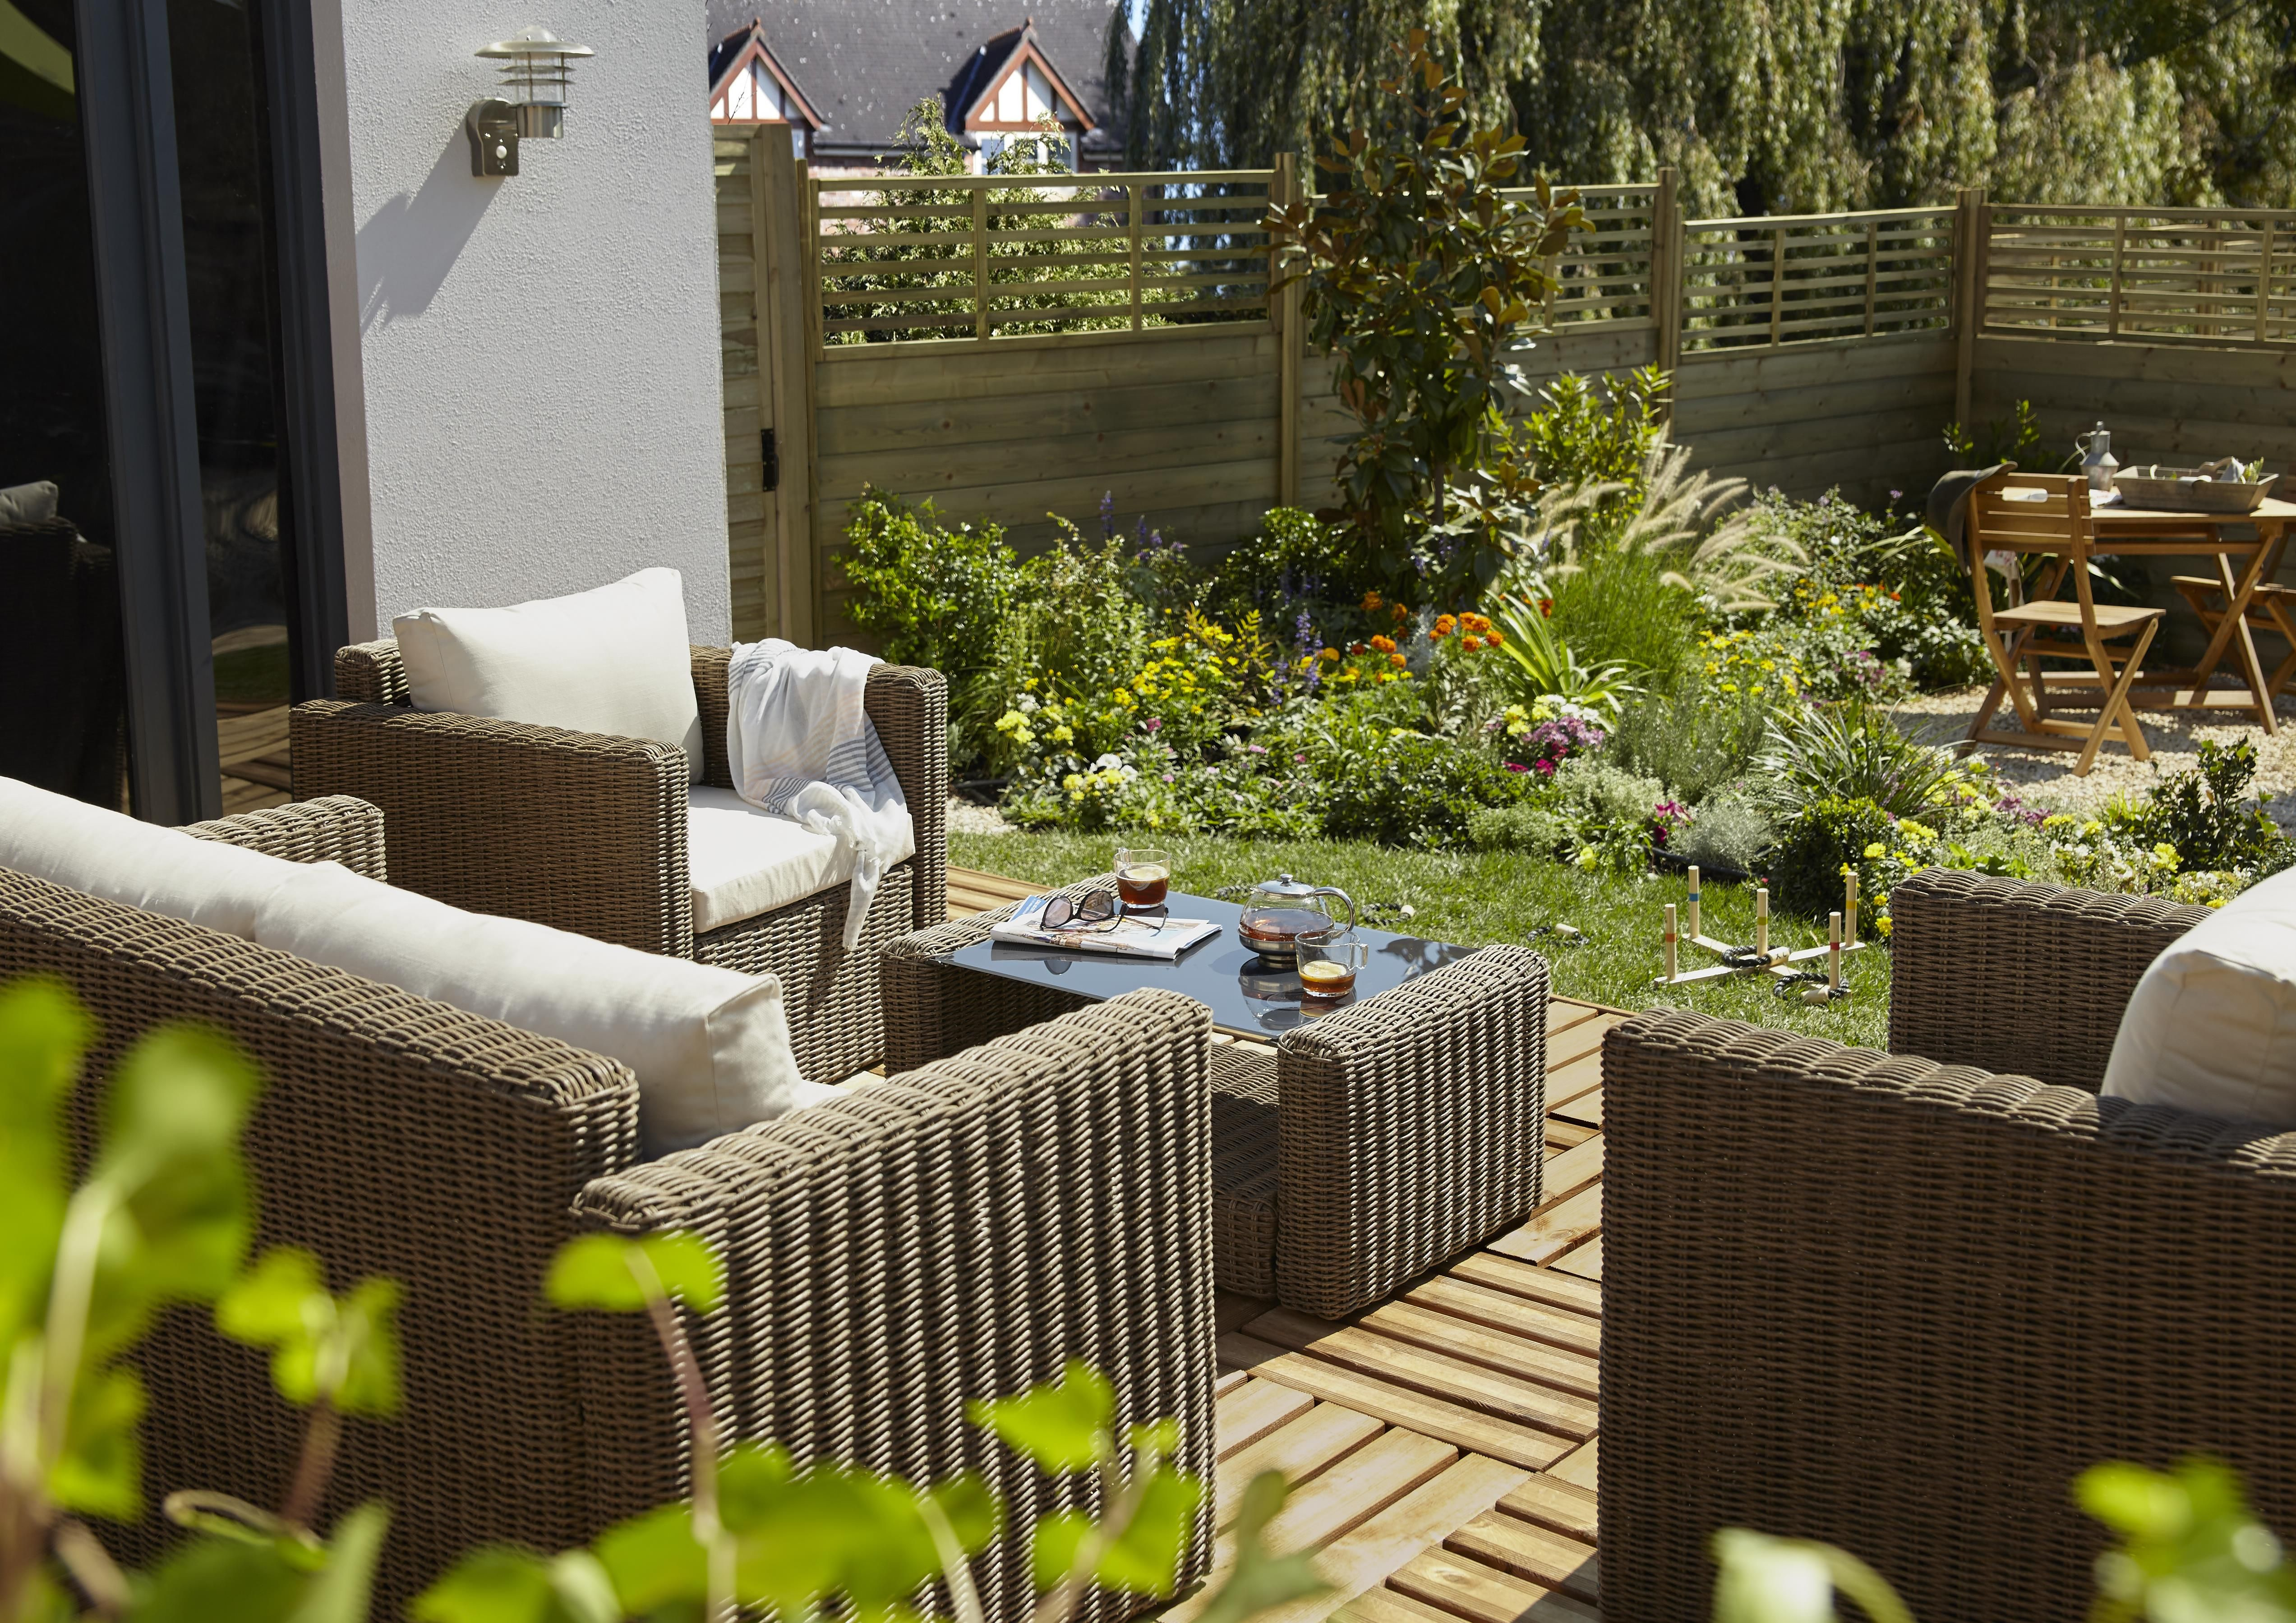 Gardens Are Considered An Unattainable Luxury For Londoners regarding measurements 5090 X 3599